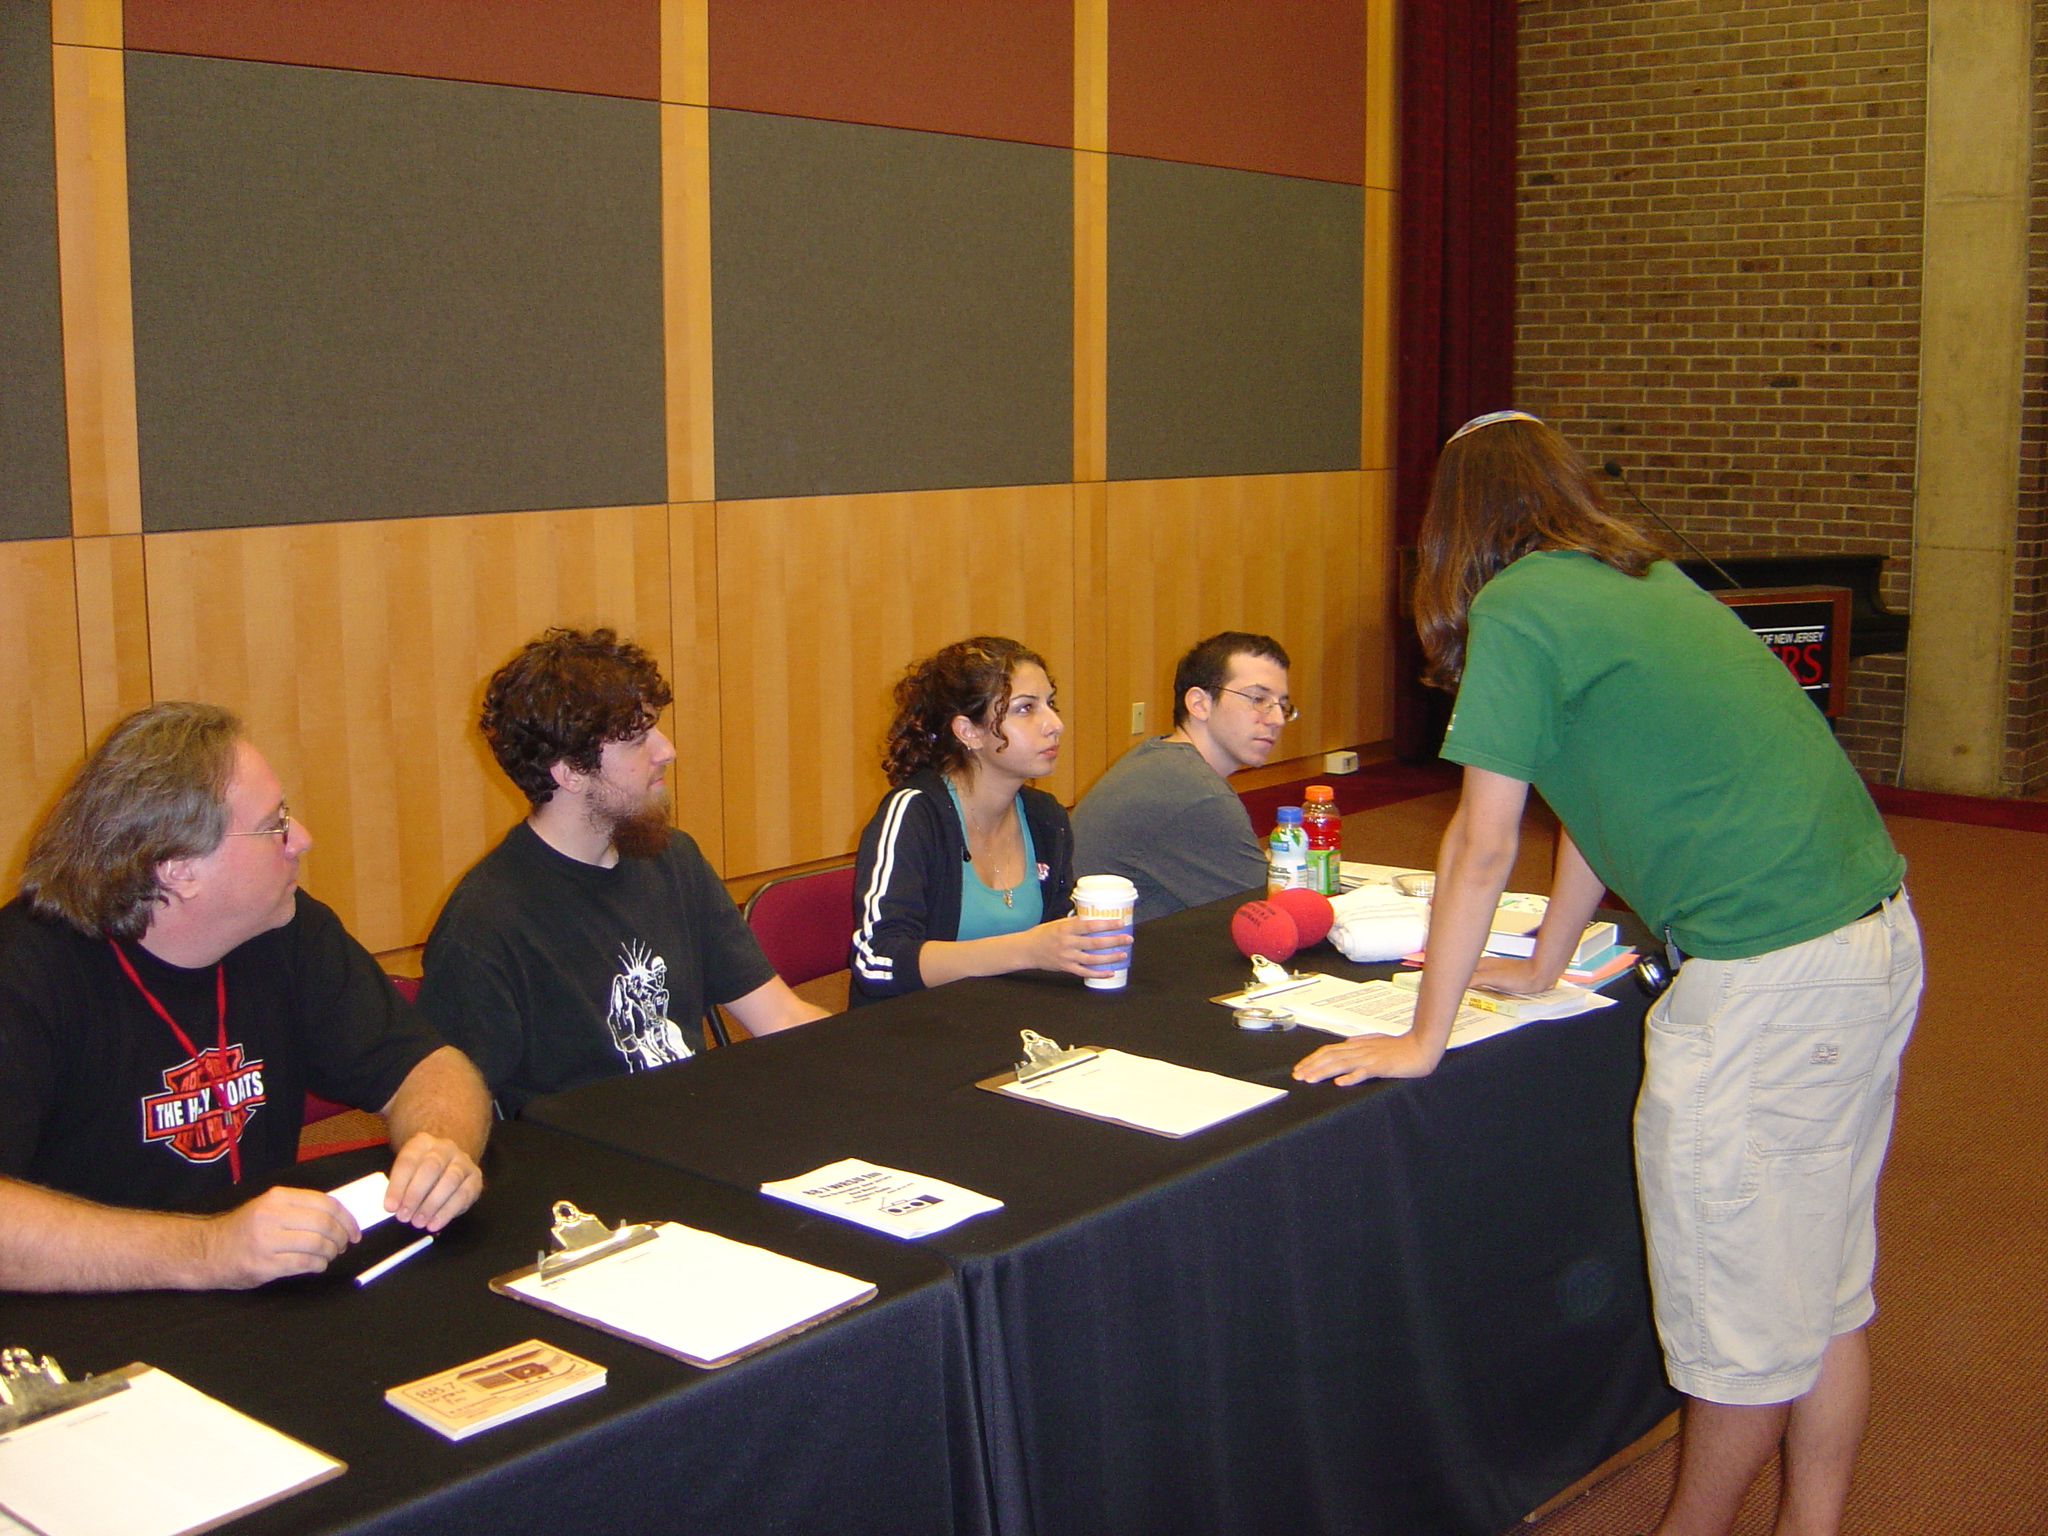 2005 - Fall New Student Orientation in the Student Center Multipurpose room.